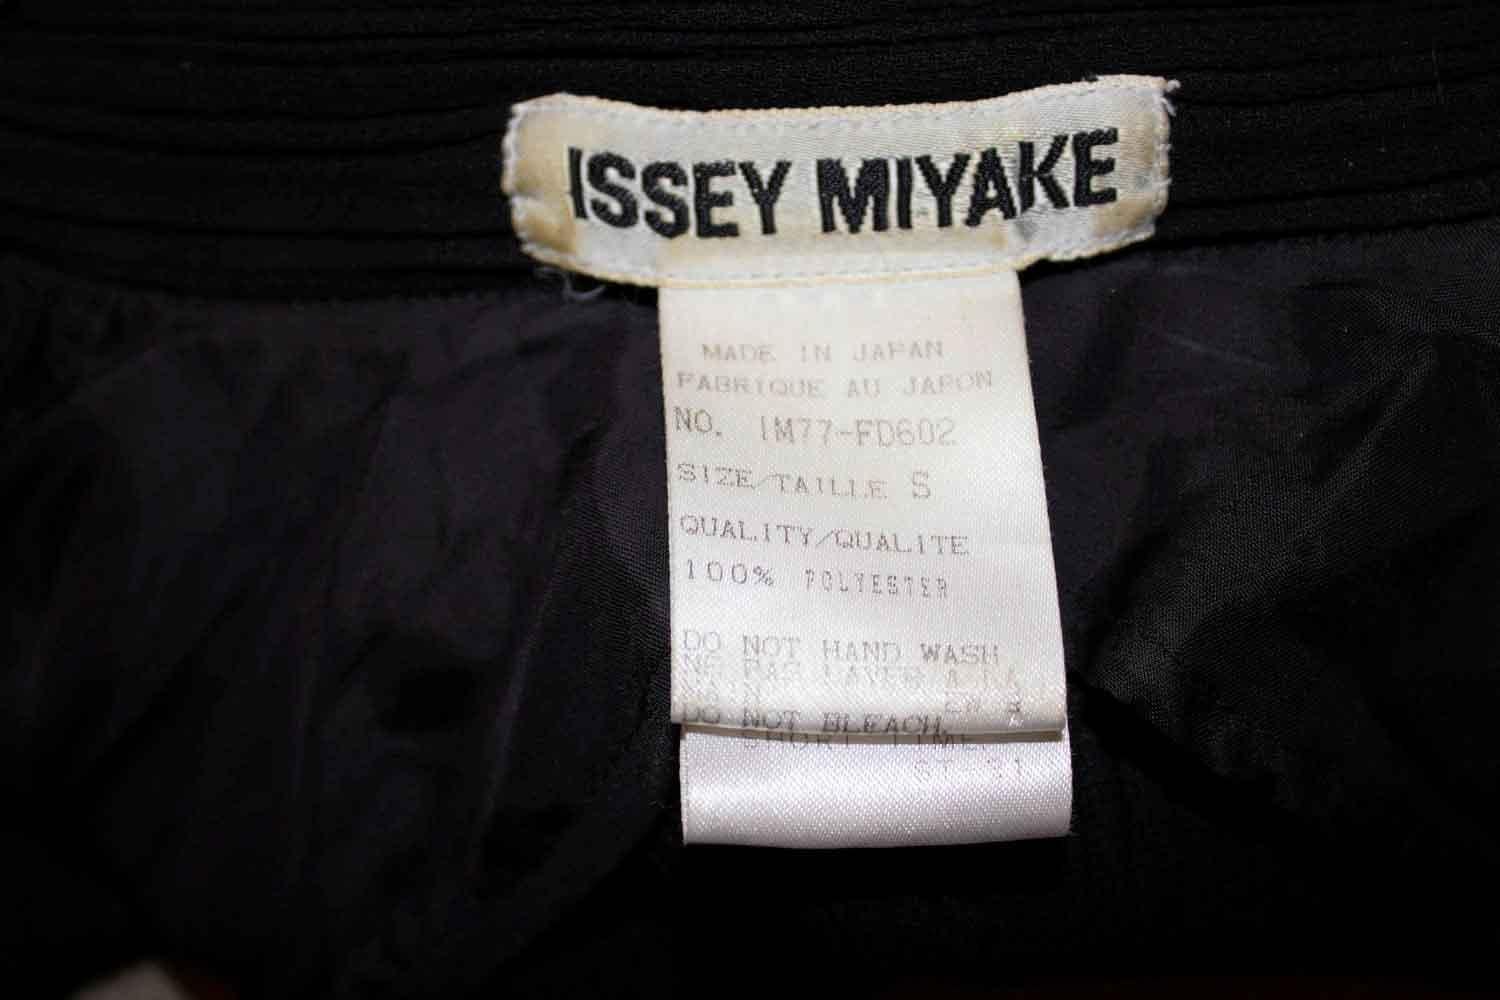 A great jacket by Issey Miyake, main line.. Size S , IM77 FD602.The jacket has a 5 button fastening, with a pocket on either side, with a button on each pocket. It has a black trim on the collar , pockets and hem. Measurements  Bust 37'' - 40'',